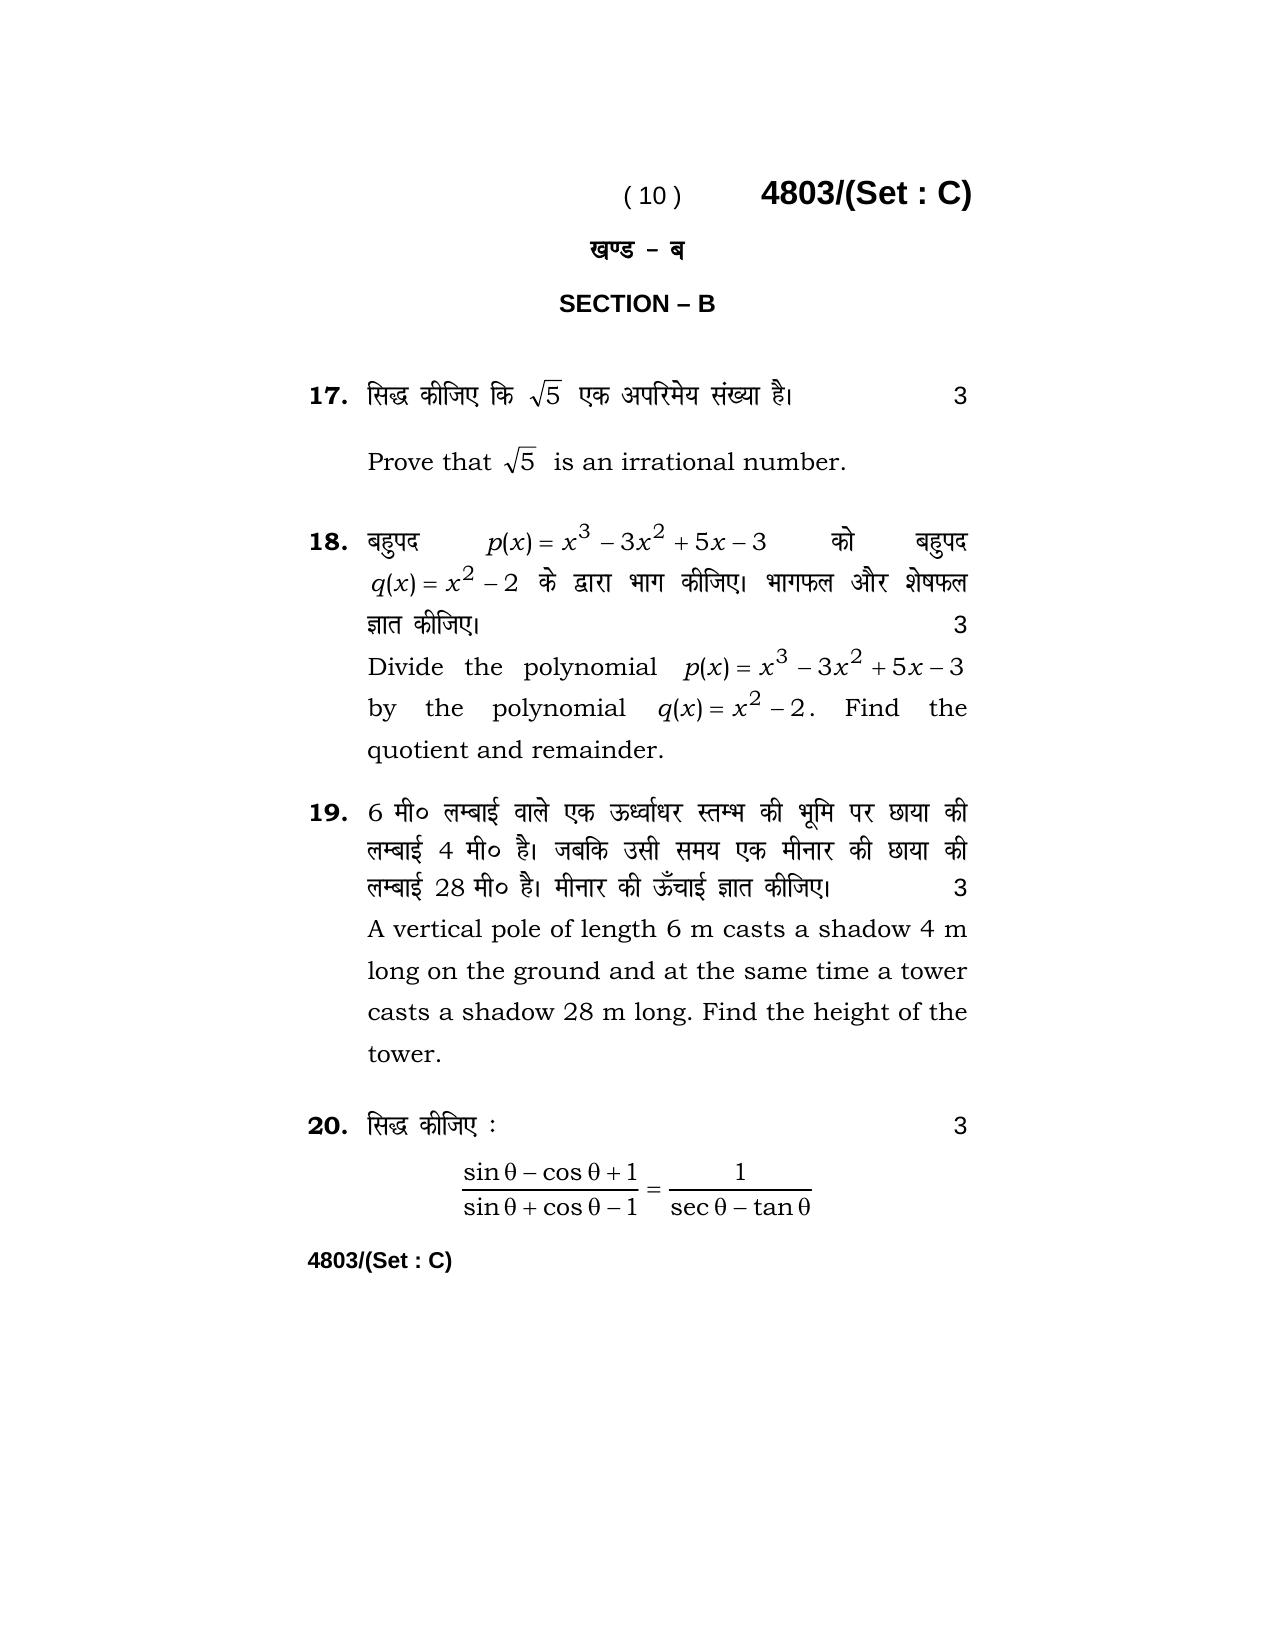 Haryana Board HBSE Class 10 Mathematics 2020 Question Paper - Page 42